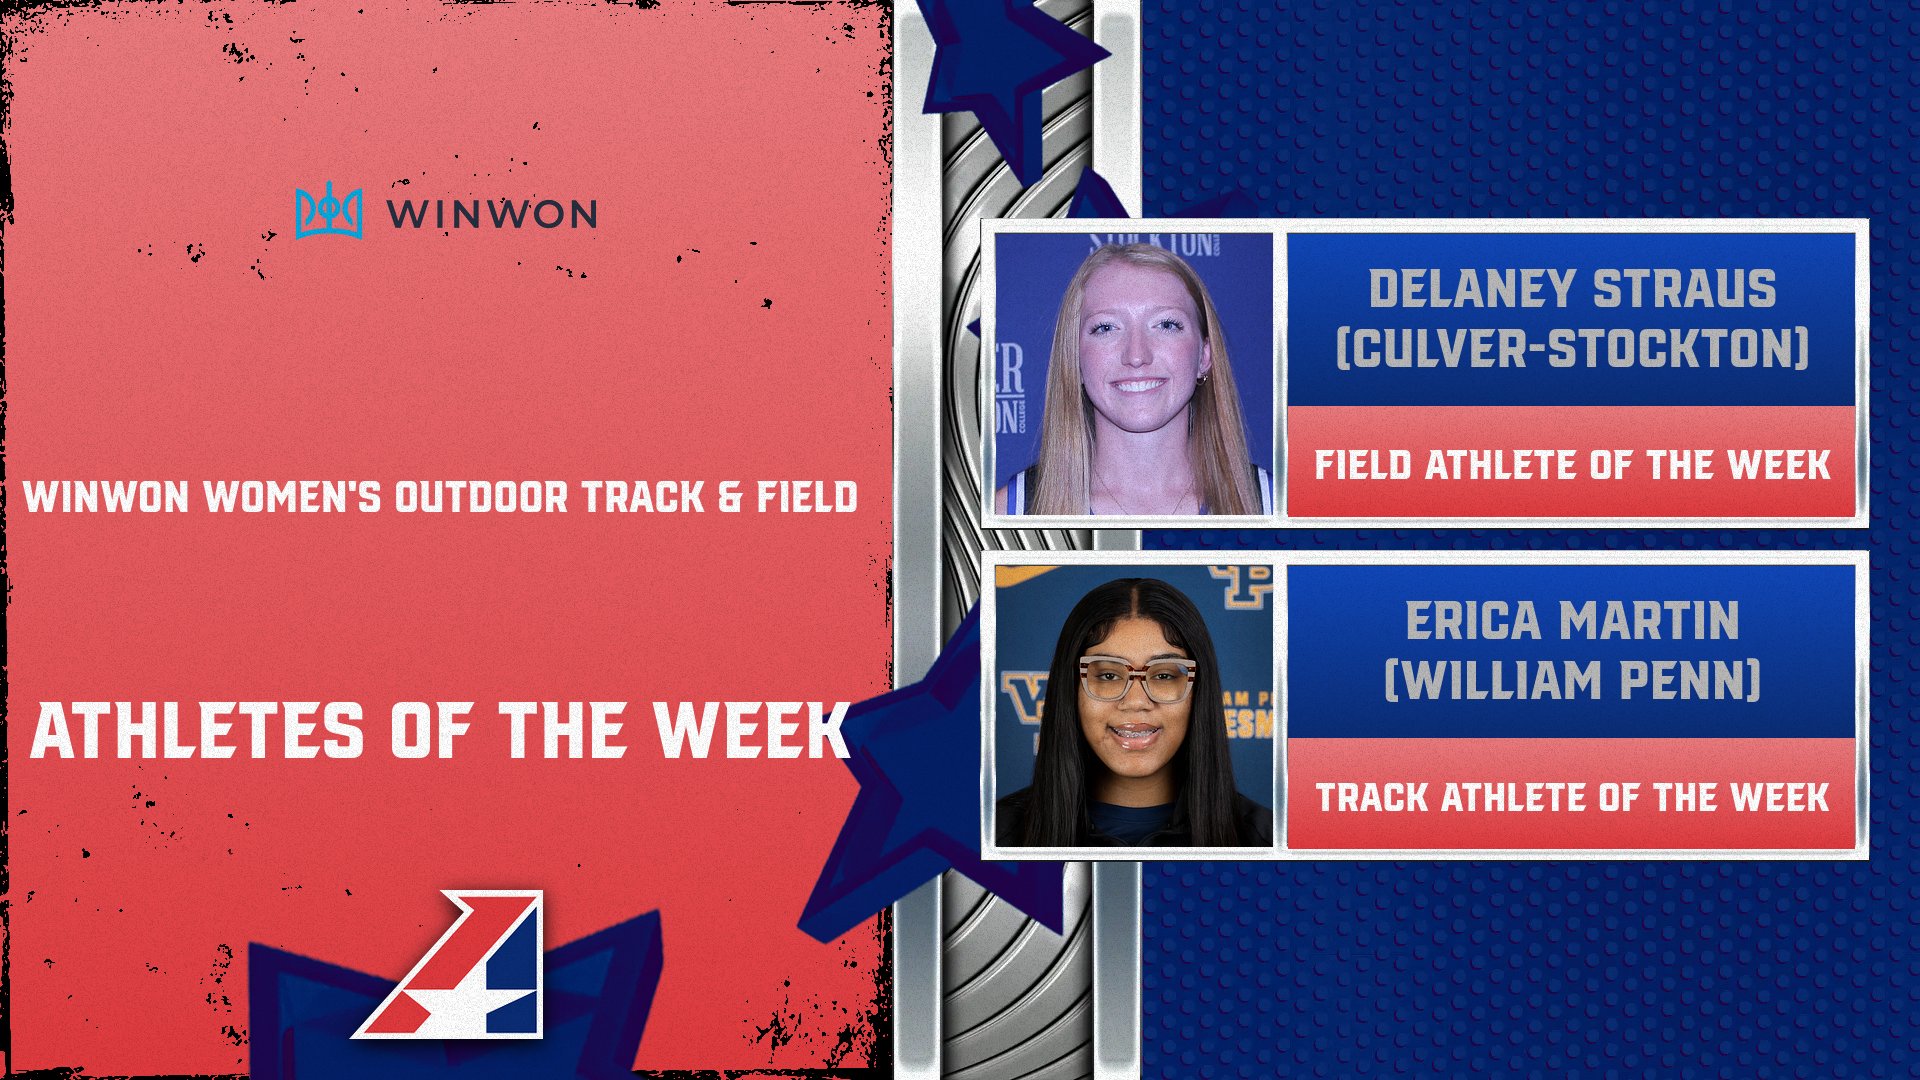 Final WinWon Women’s Outdoor Track & Field Athletes of the Week of 2024 Announced